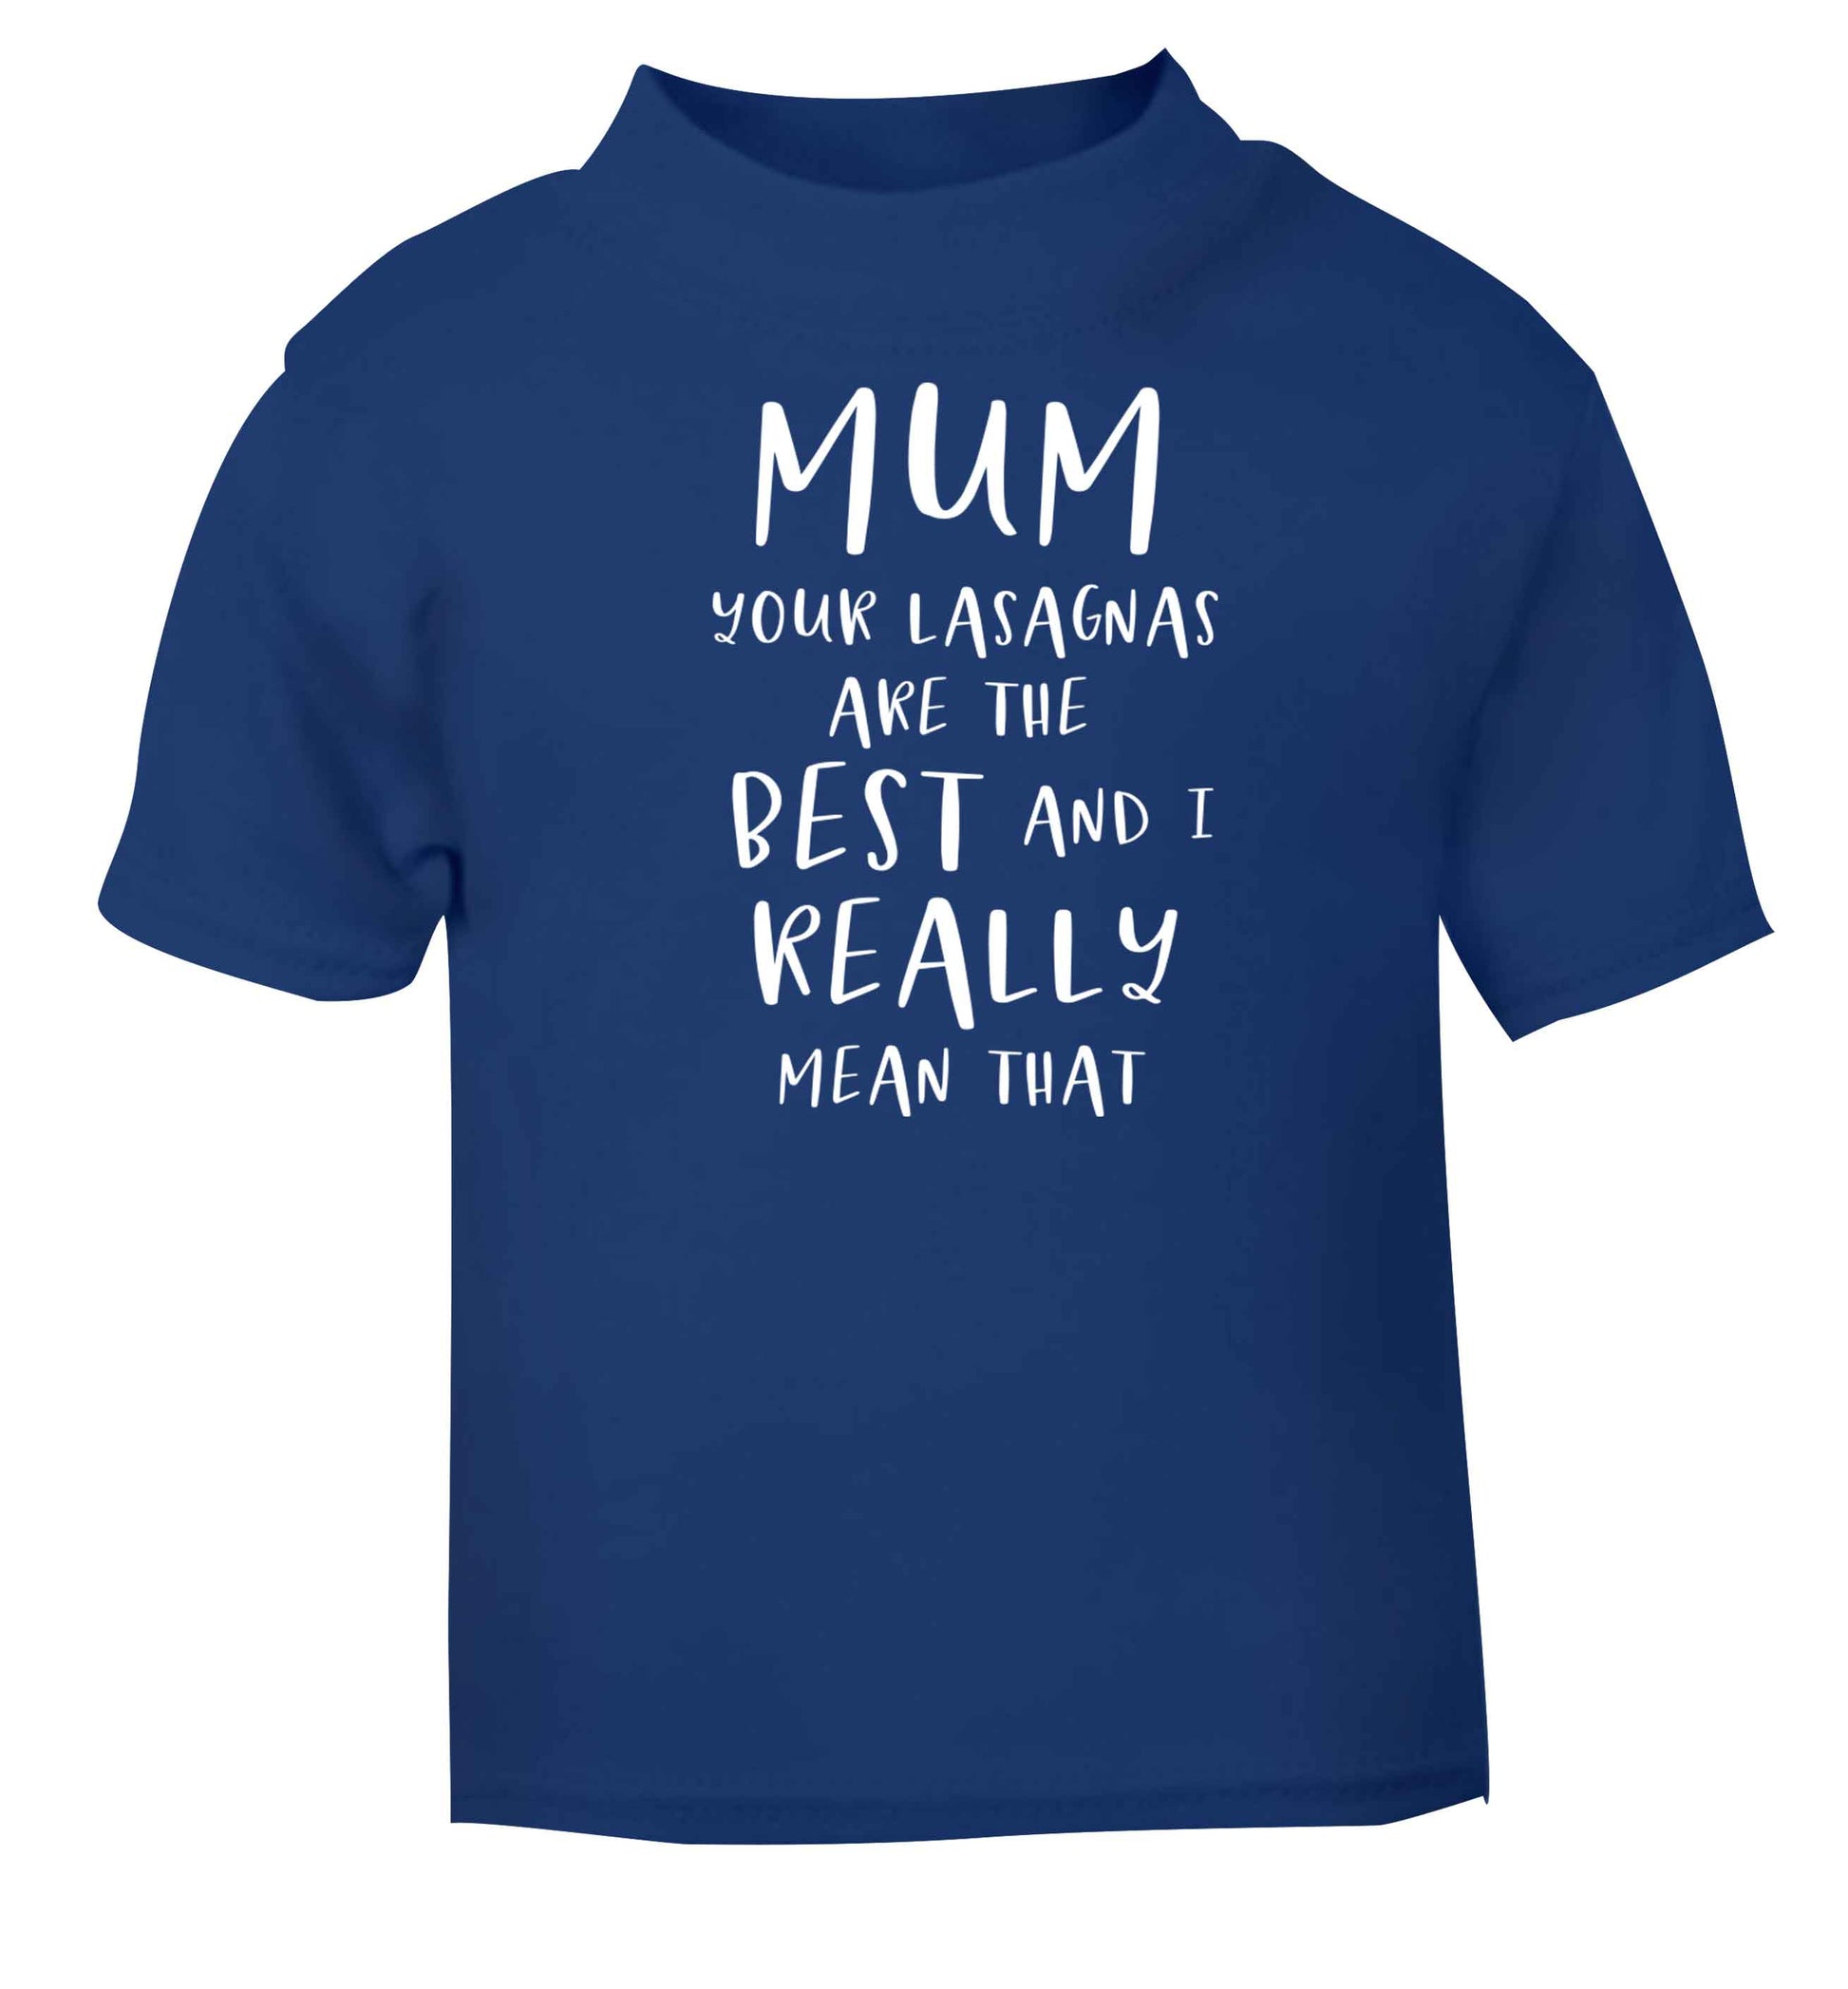 Funny gifts for your mum on mother's dayor her birthday! Mum your lasagnas are the best and I really mean that blue baby toddler Tshirt 2 Years